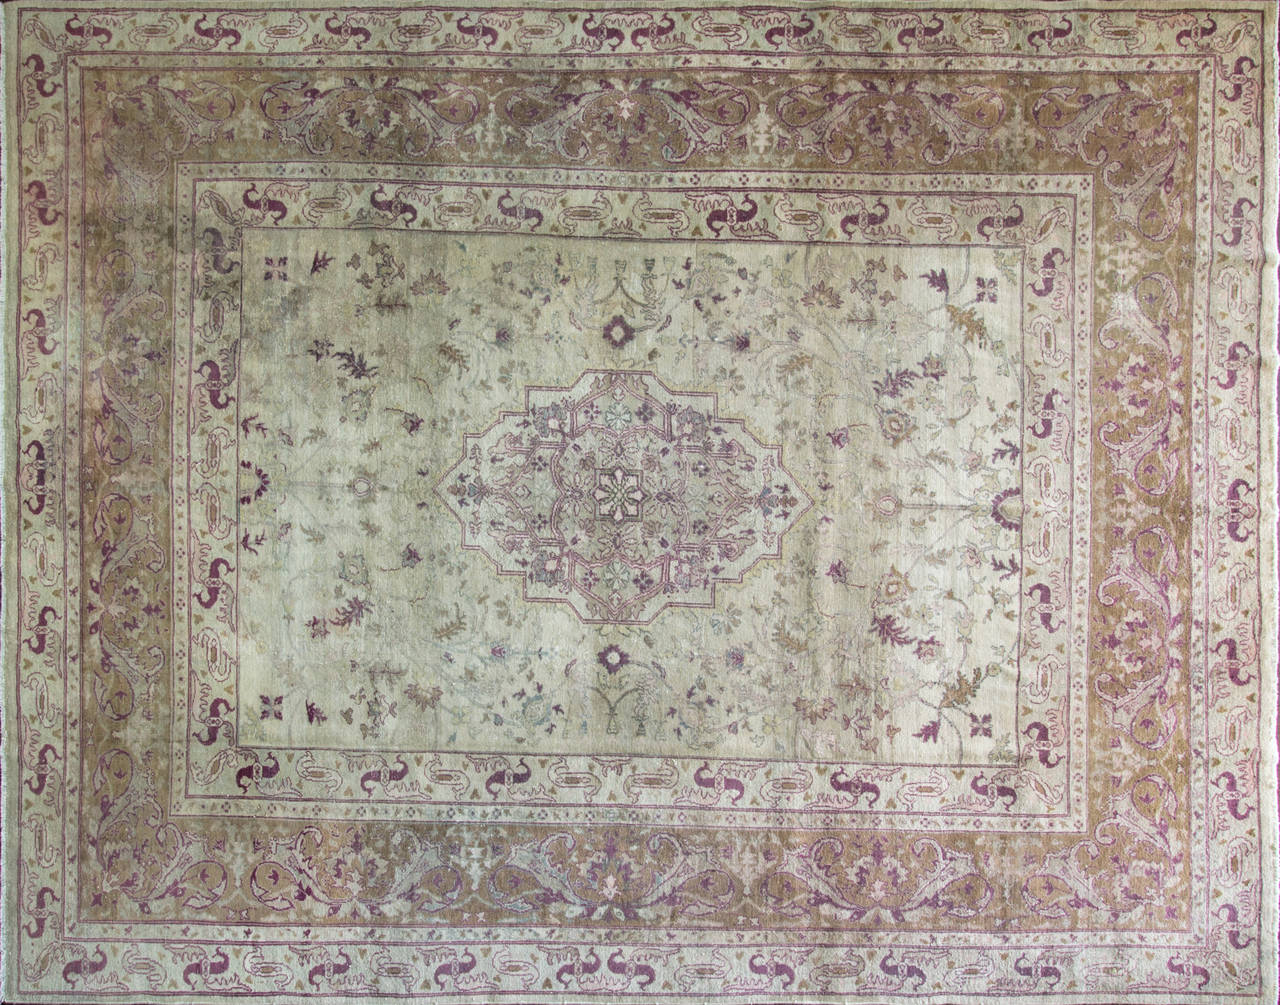 An antique Amritsar carpet that was woven in India around the turn of the 20th century. Characterized by beautifully precise line work as well as a charmingly muted pallet of pale pink and gold, this Amritsar carpet exemplifies some of the finest